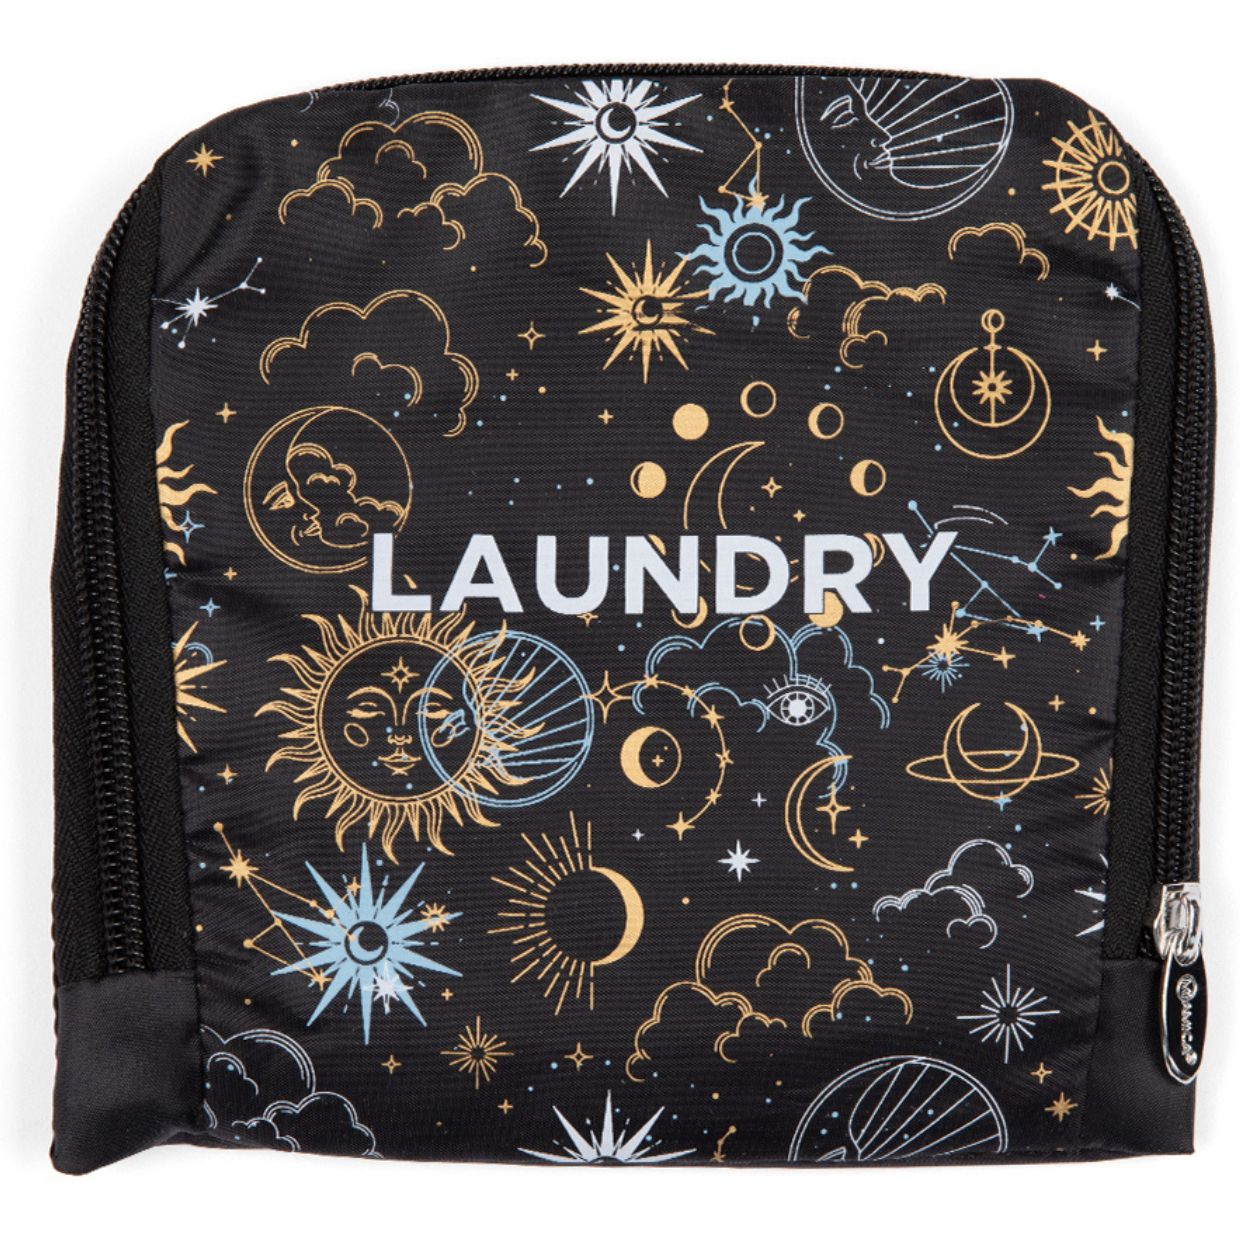 Miamica Foldable Travel Laundry Bag, Black Gold Celestial Moon and Stars Lightweight, Durable Design with Drawstring Closure, Size: Large